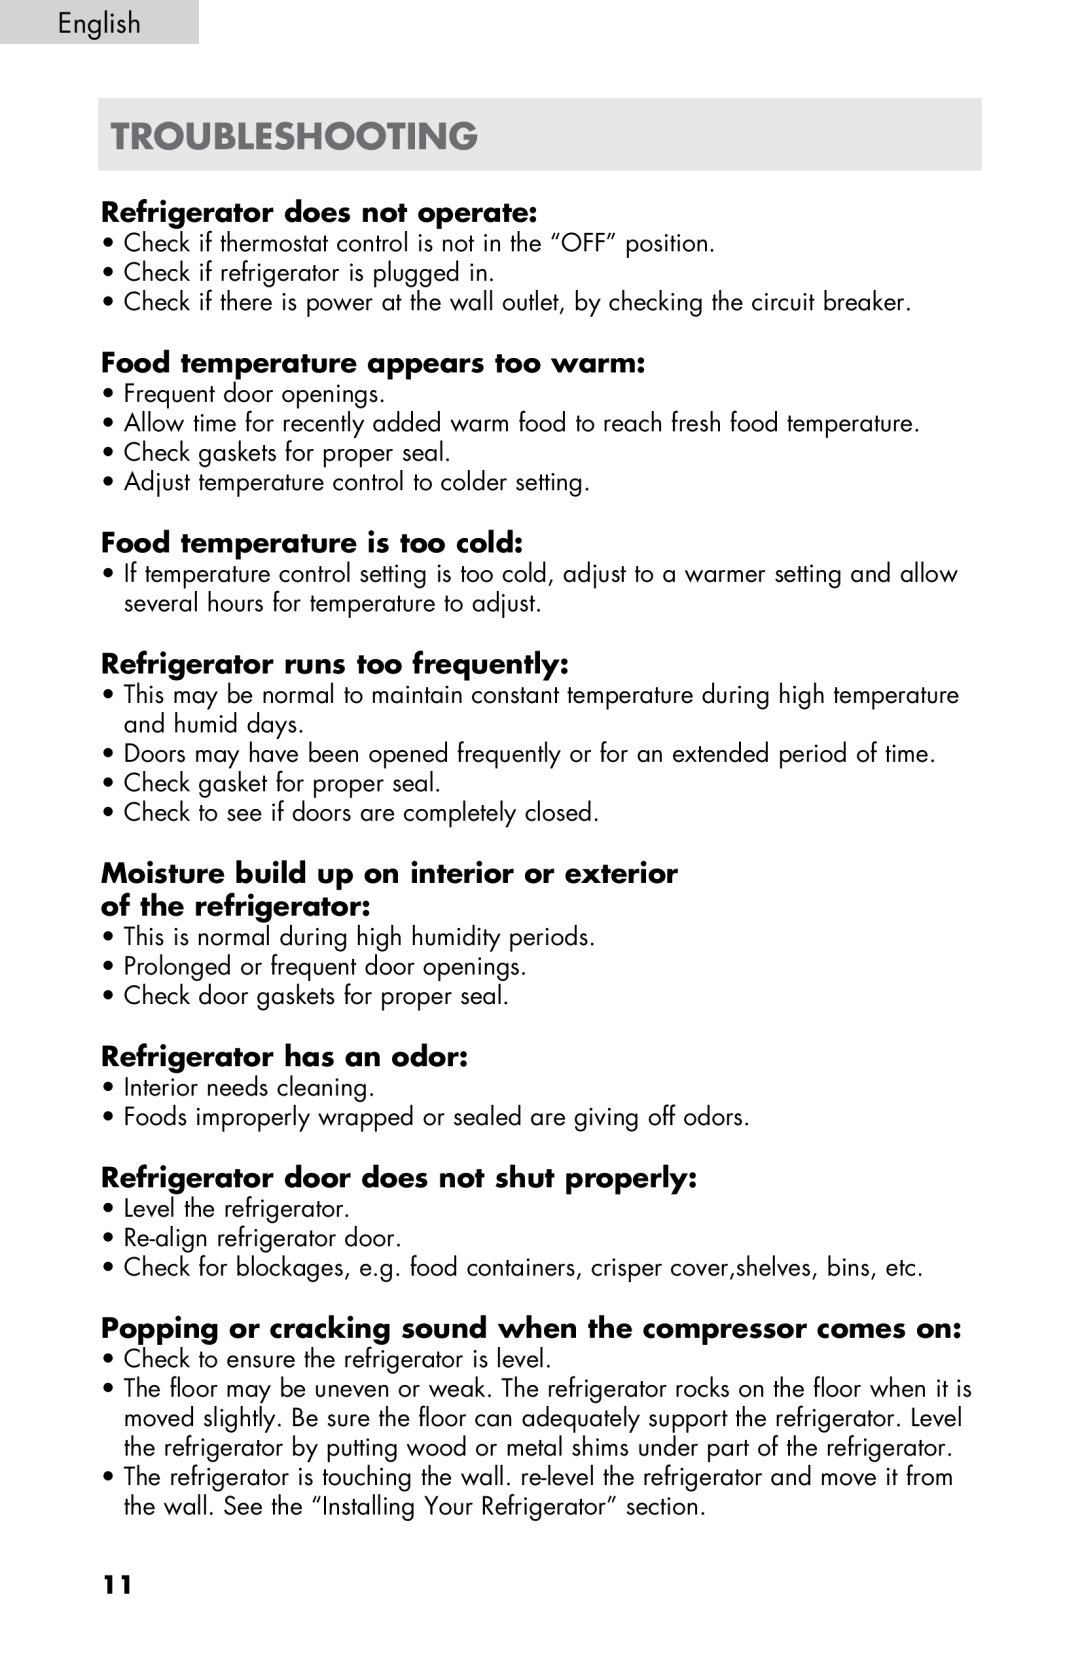 Haier HC17SF15RW user manual troubleshooting, Refrigerator does not operate, Food temperature appears too warm 